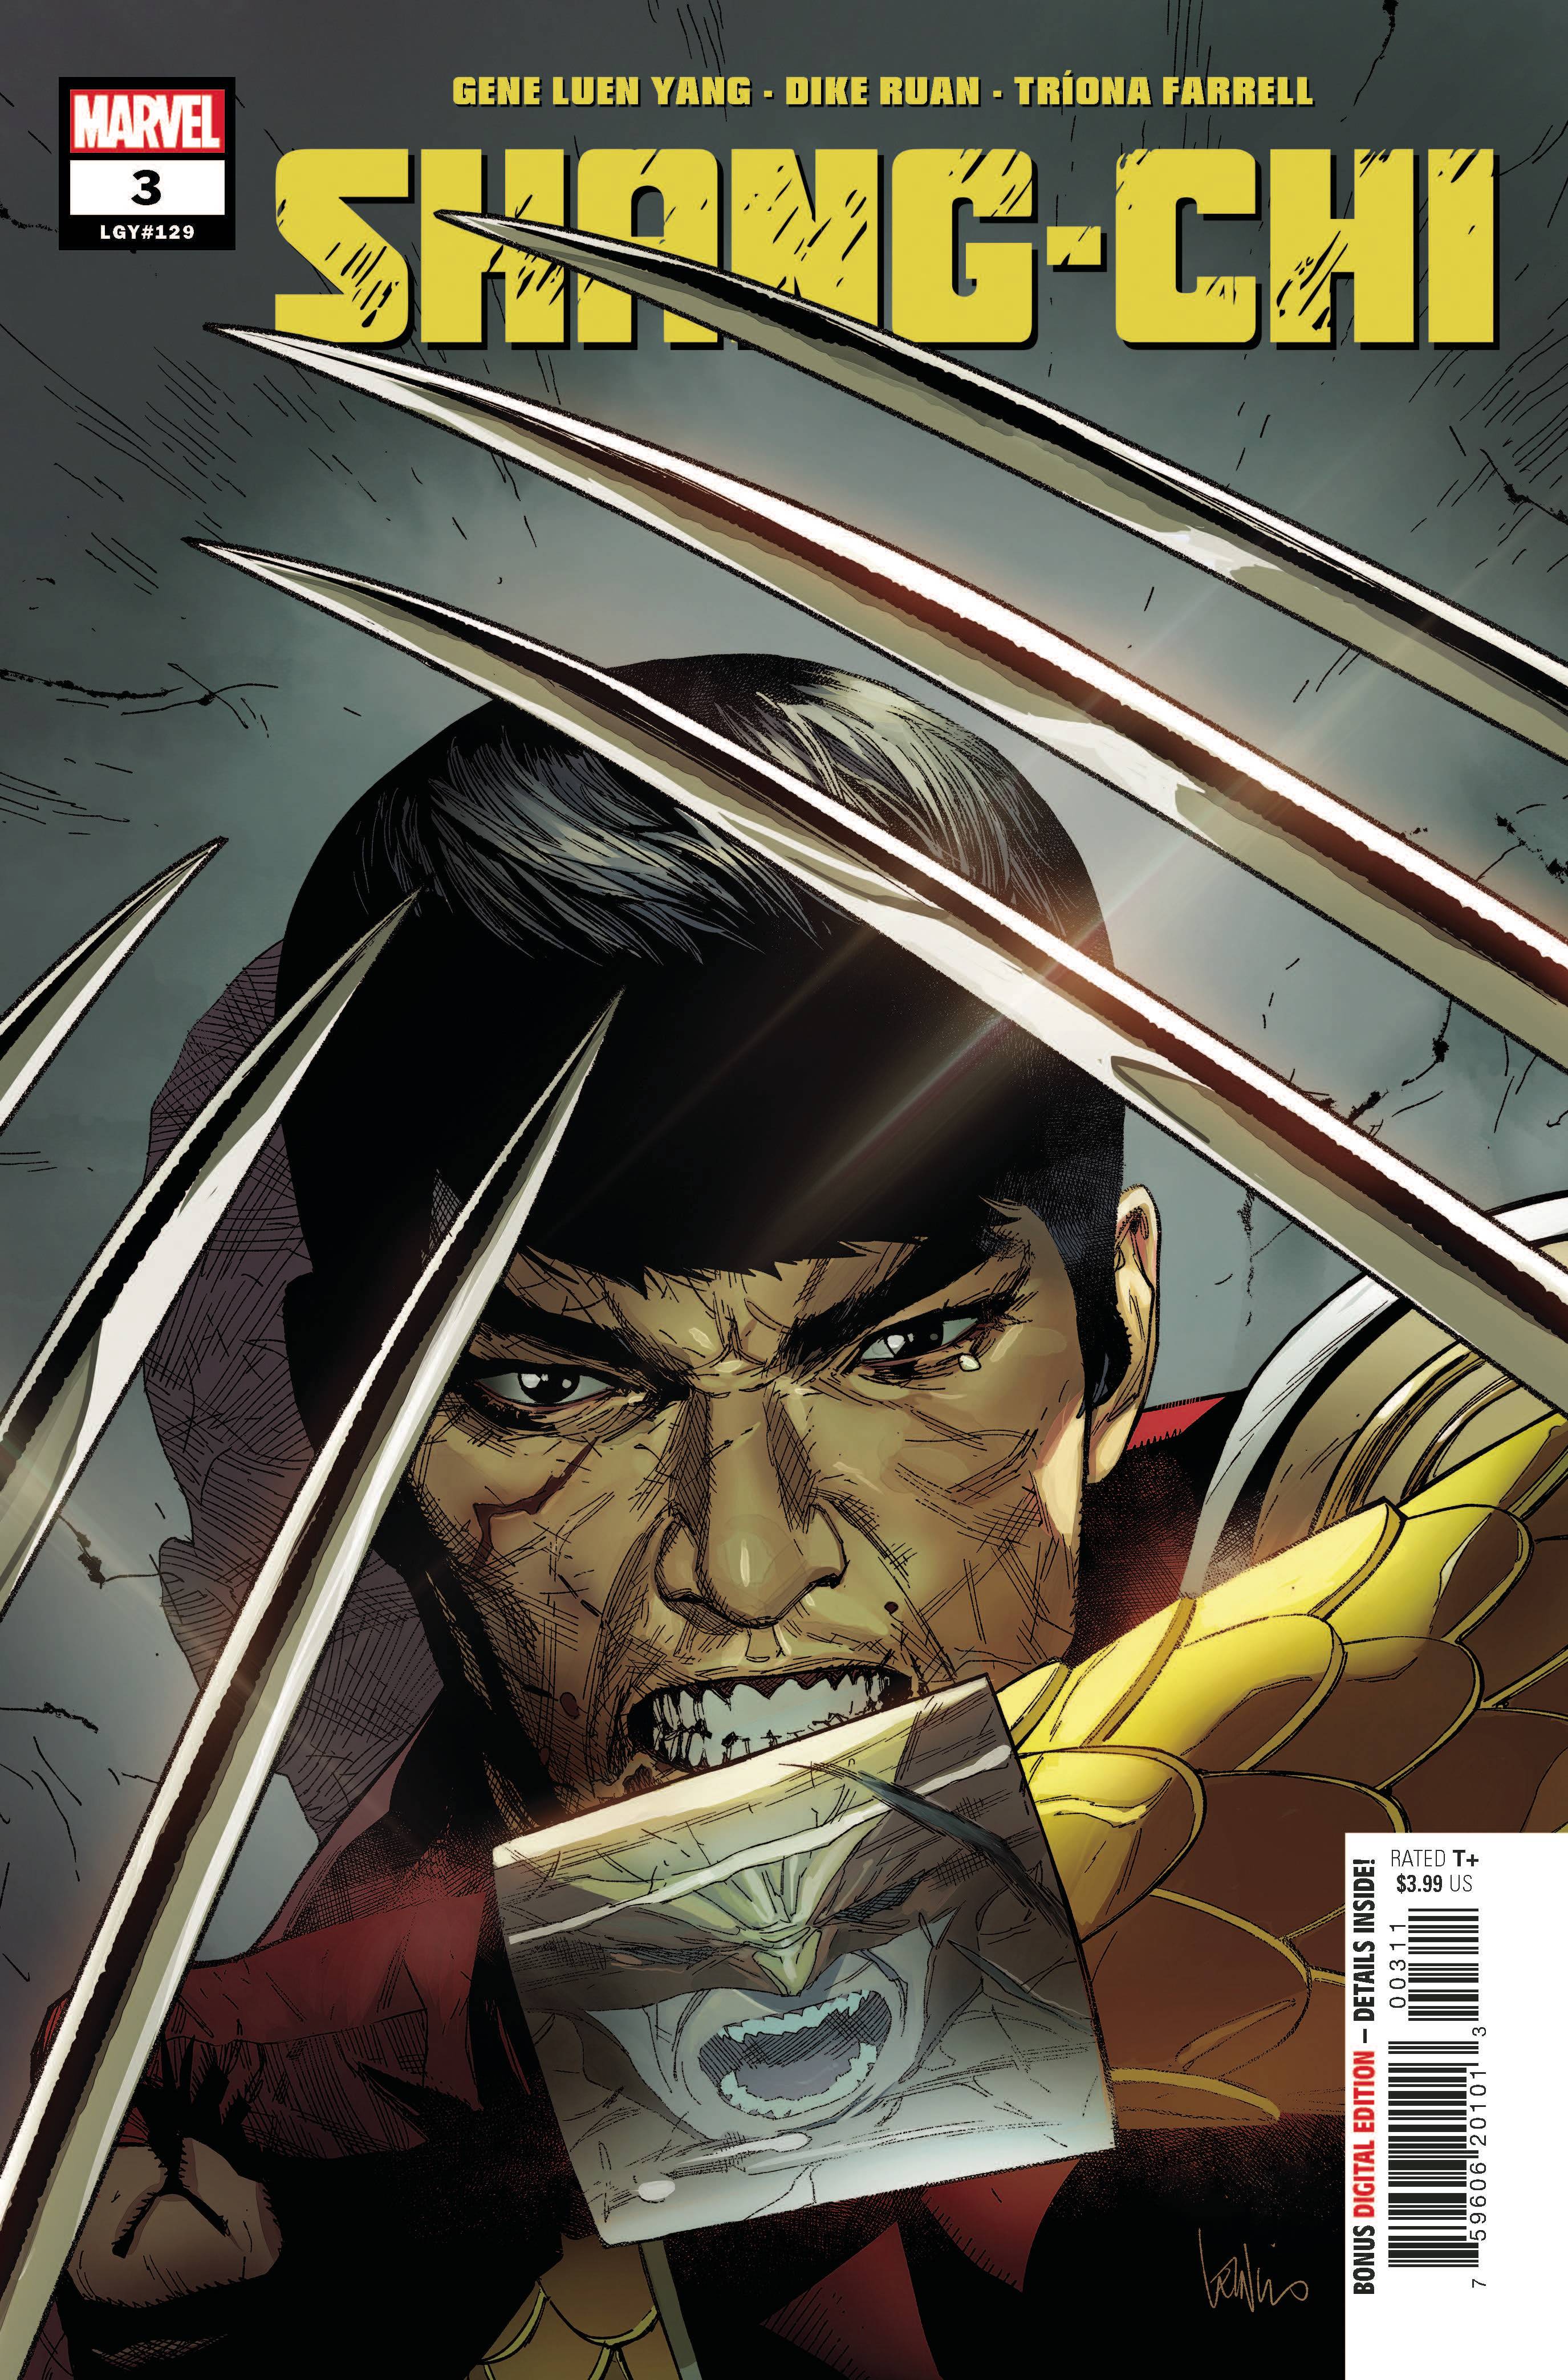 Photo of Shang-Chi Issue 3 comic sold by Stronghold Collectibles